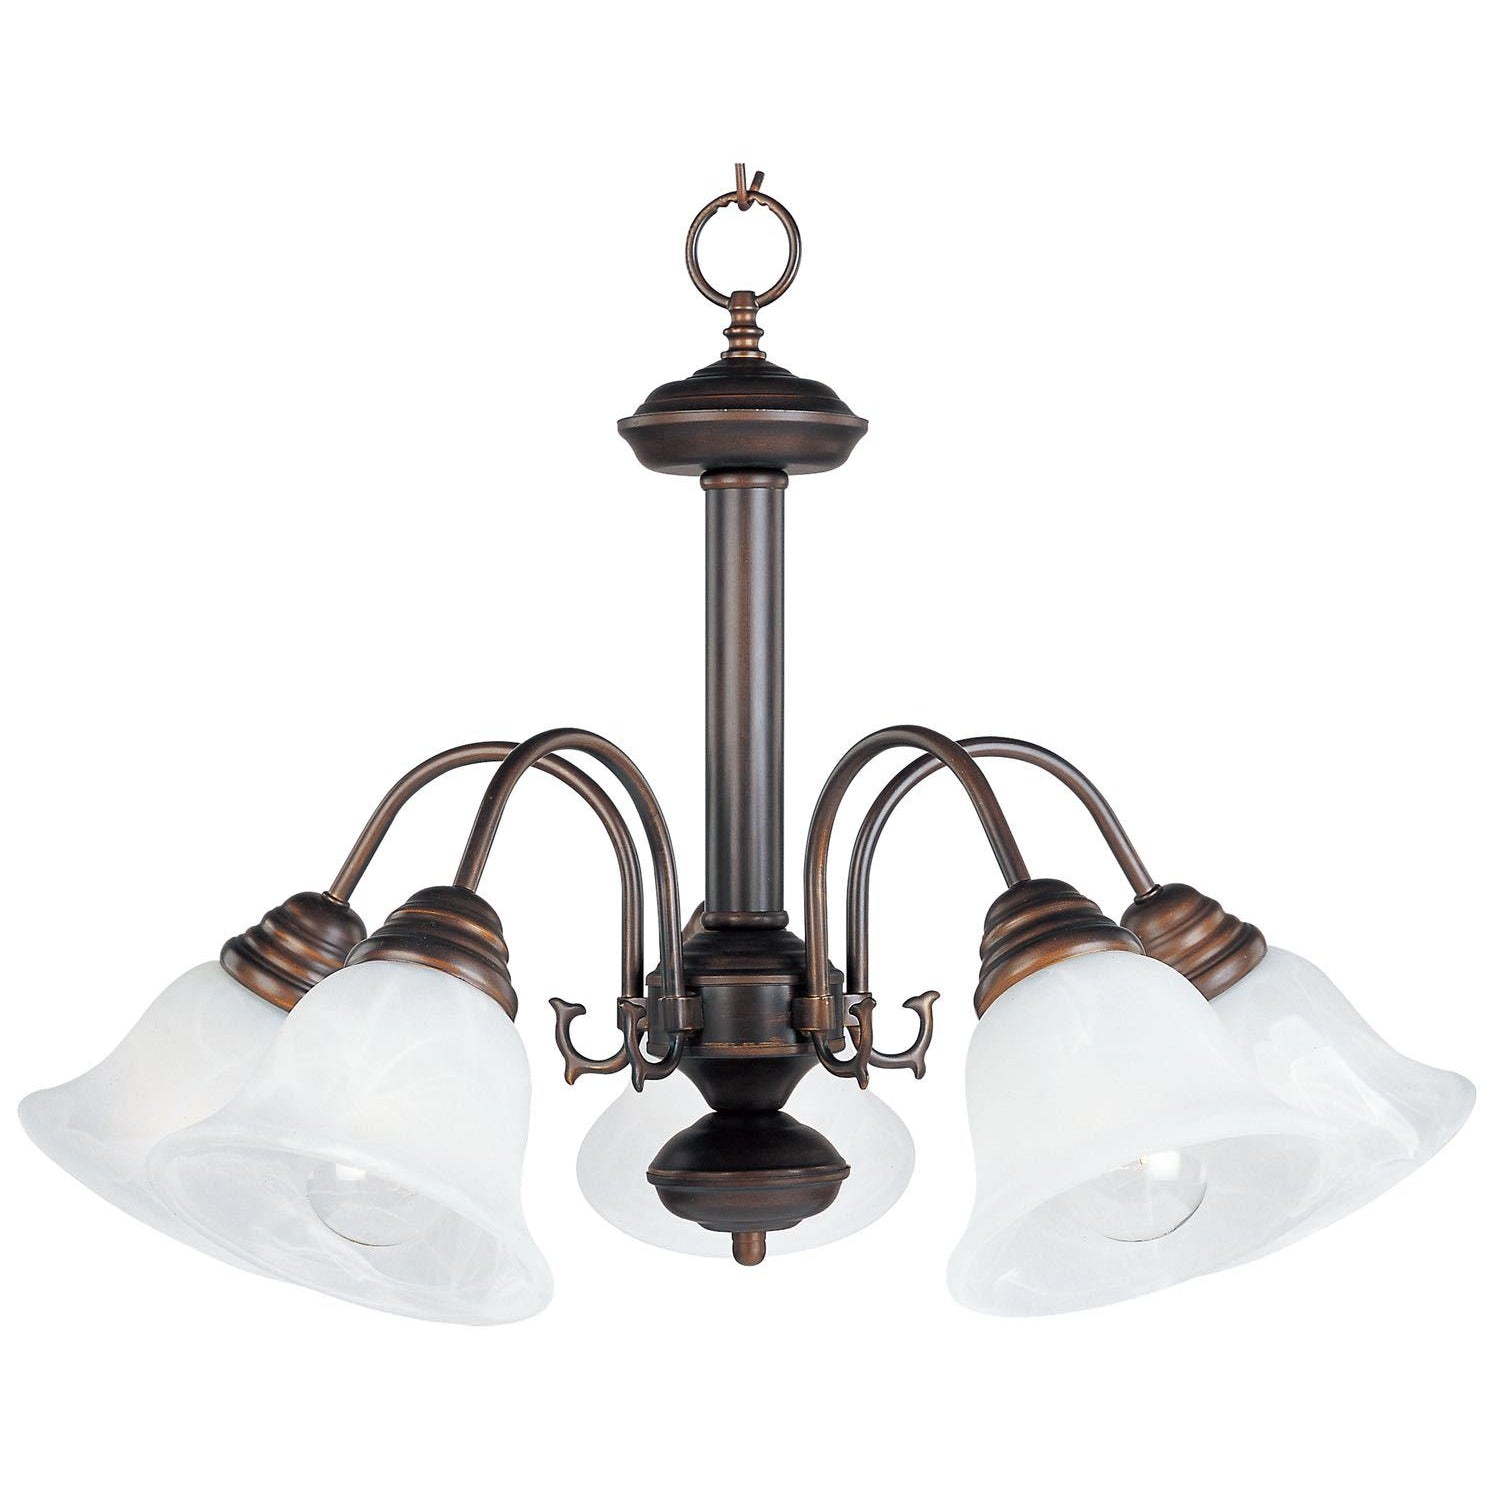 Malaga Chandelier Oil Rubbed Bronze | Marble